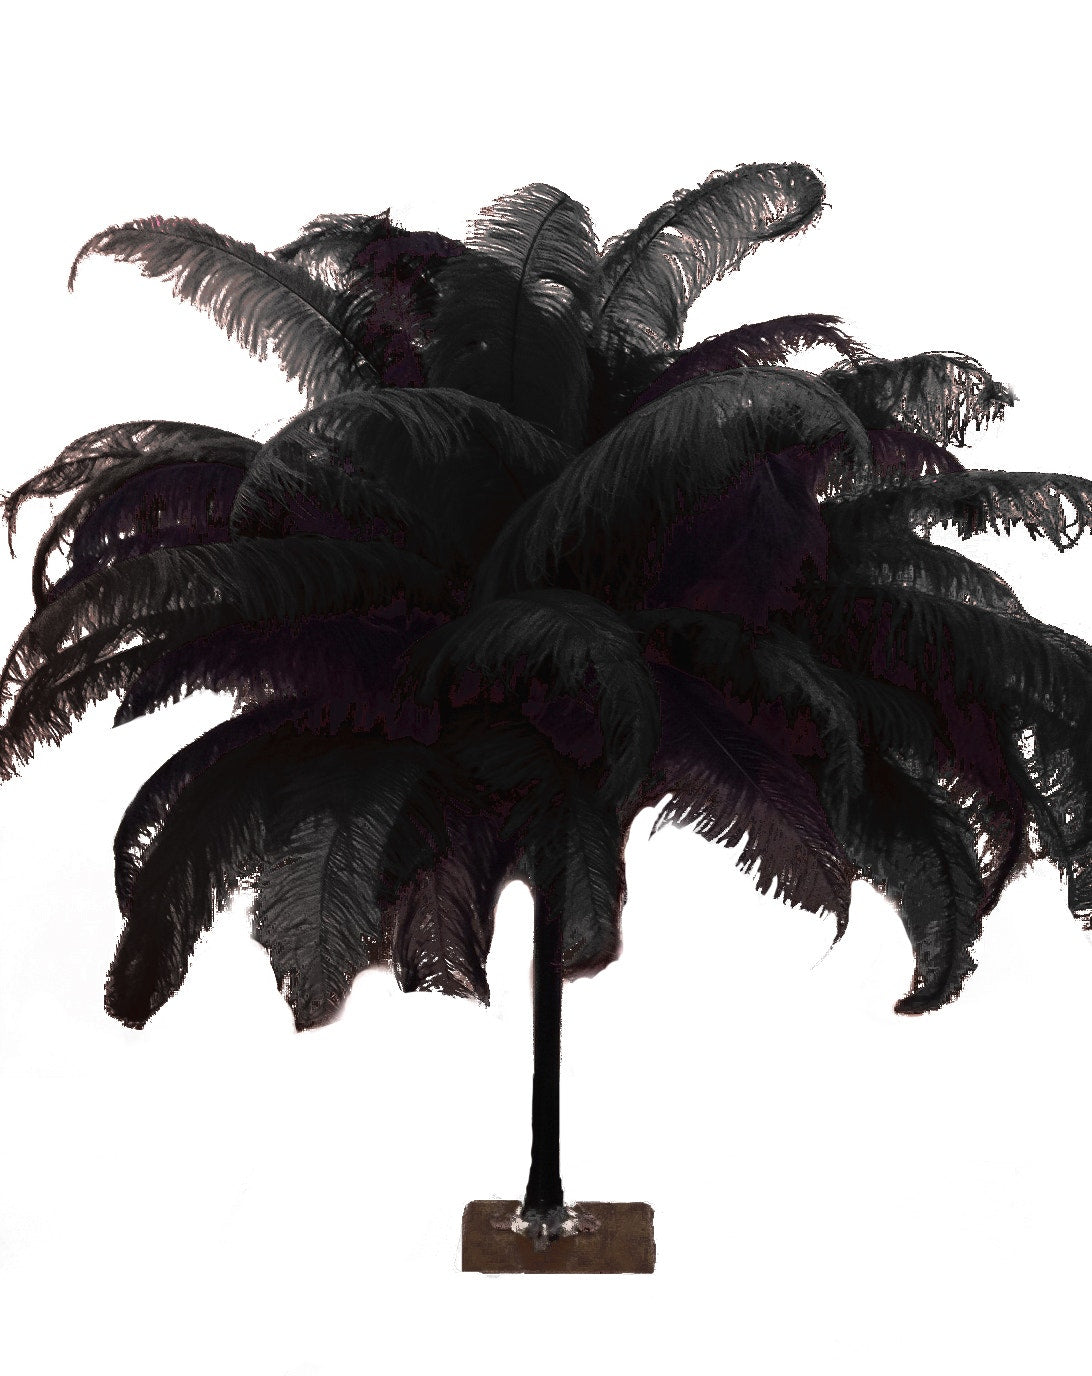 Large Ostrich Feathers - 18-24" Spads - Black